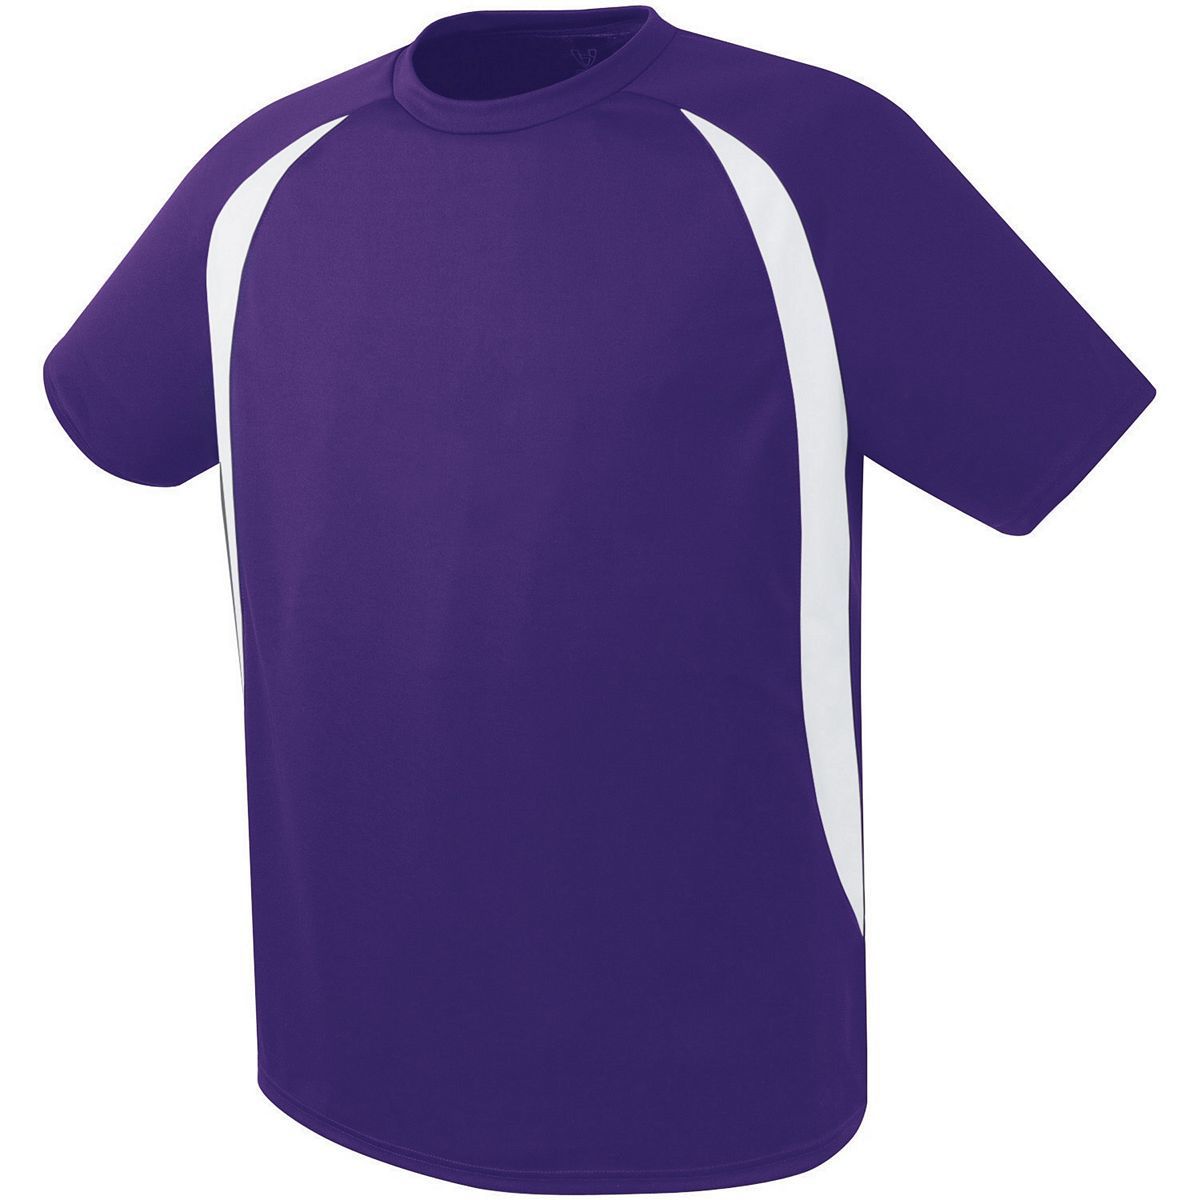 High 5 Liberty  Soccer Jersey in Purple/White  -Part of the Adult, Adult-Jersey, High5-Products, Soccer, Shirts, All-Sports-1 product lines at KanaleyCreations.com